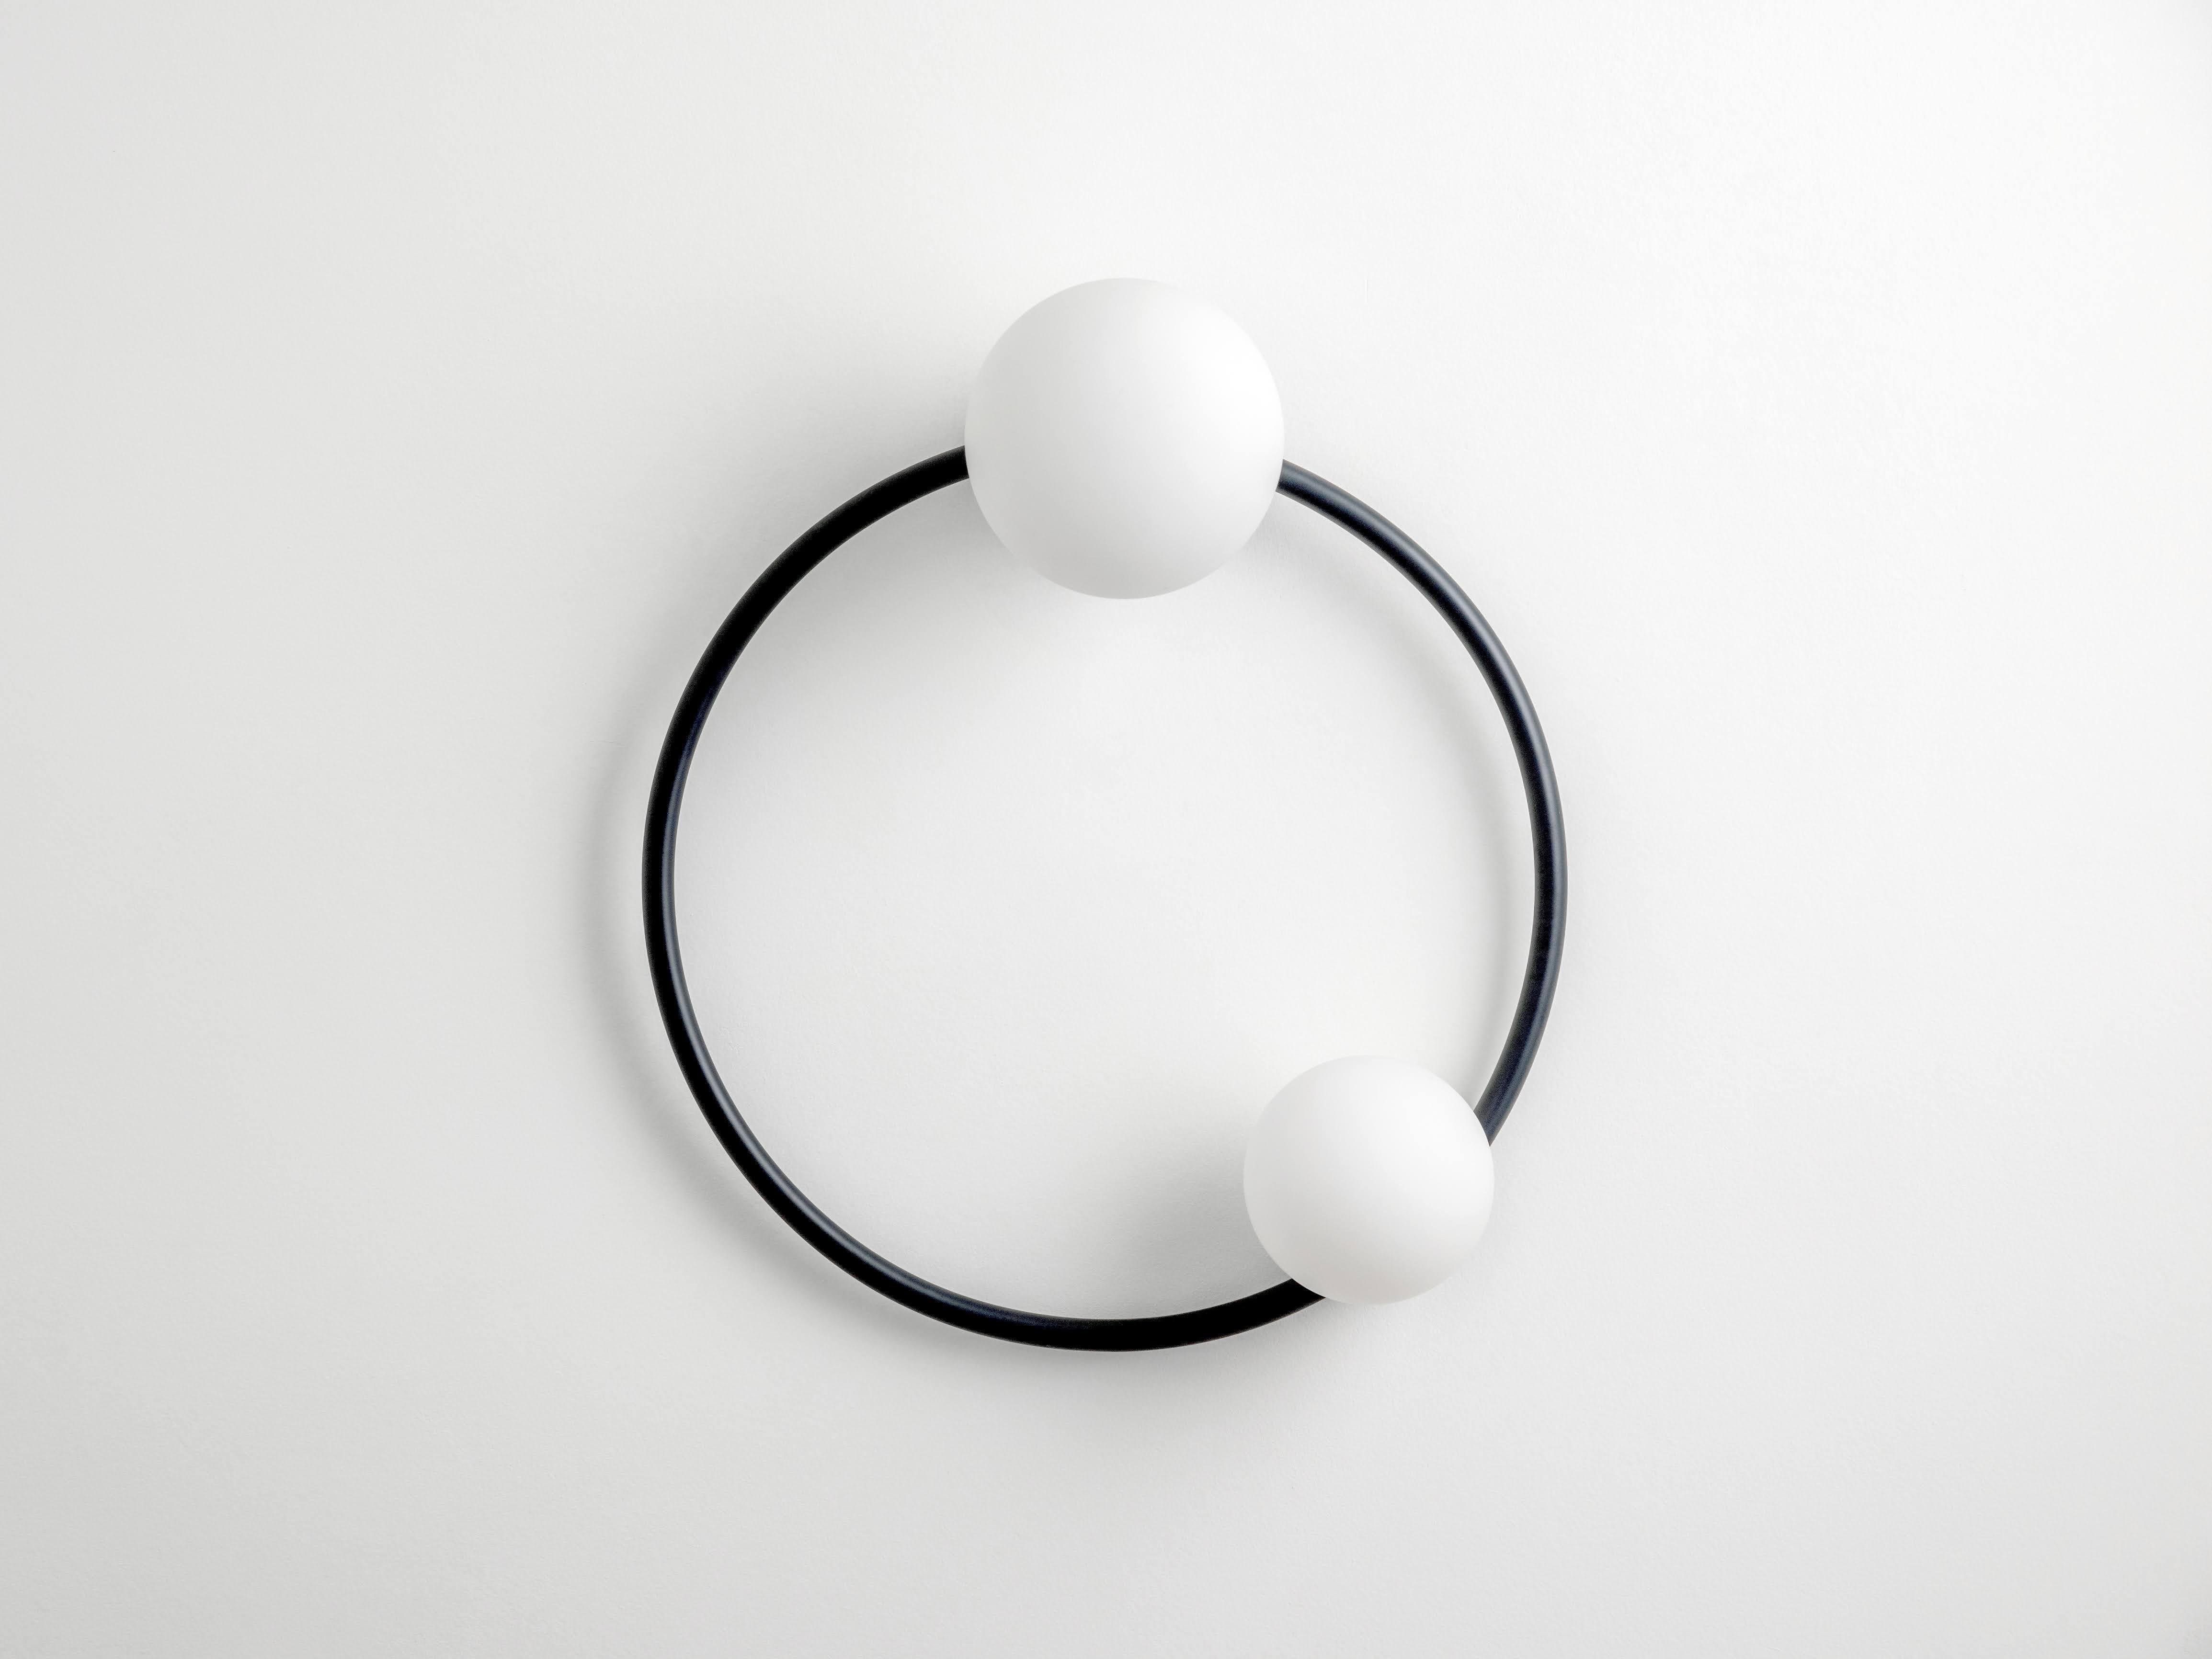 A light that double as a work of art, our iconic ring wall light combines sculptural shapes with luxurious finishes to create this eye catching lamp. Diffusing a soft light across a room, our ring light is perfect for hallways or living rooms to